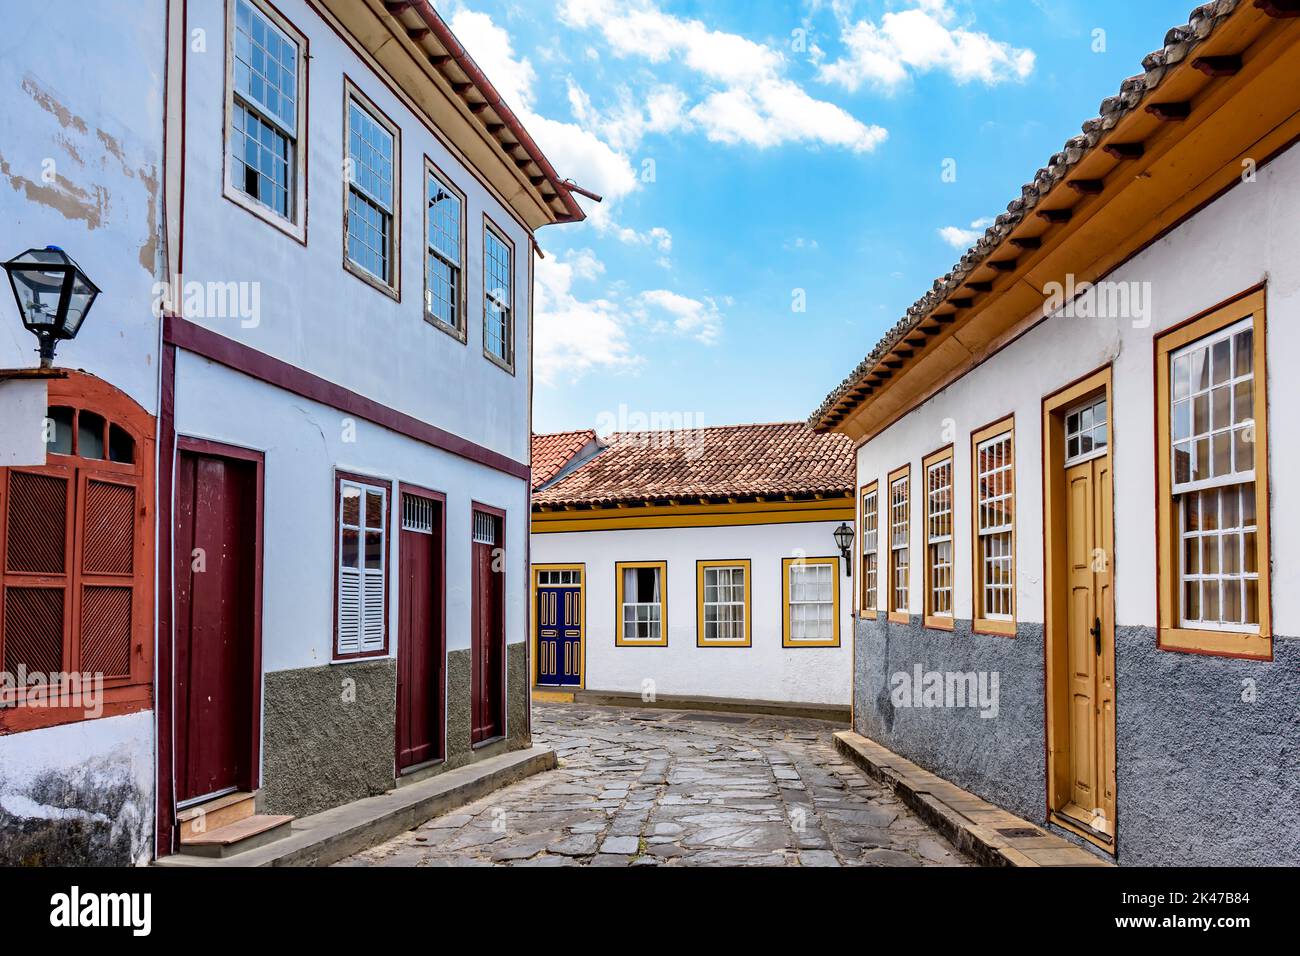 Street with cobblestones and houses with colonial architecture in the old and historic city of Diamantina in Minas Gerais, Brazil Stock Photo